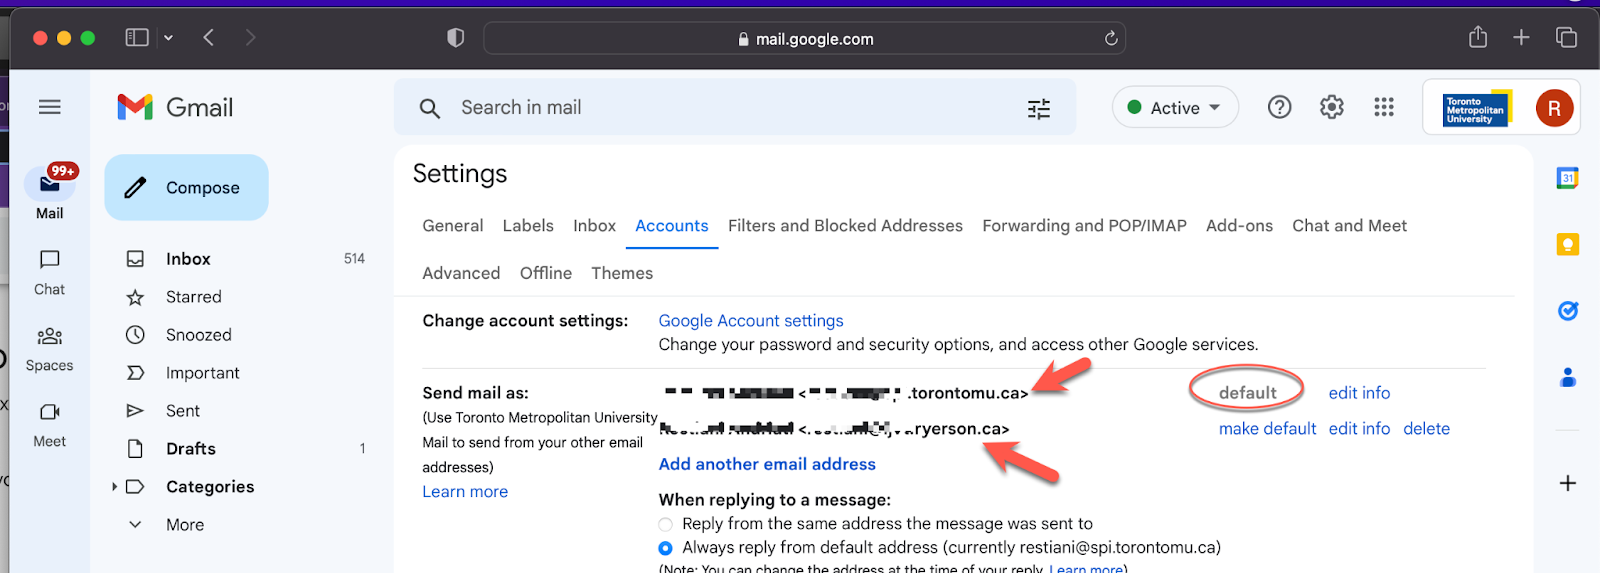 Gmail Send email as